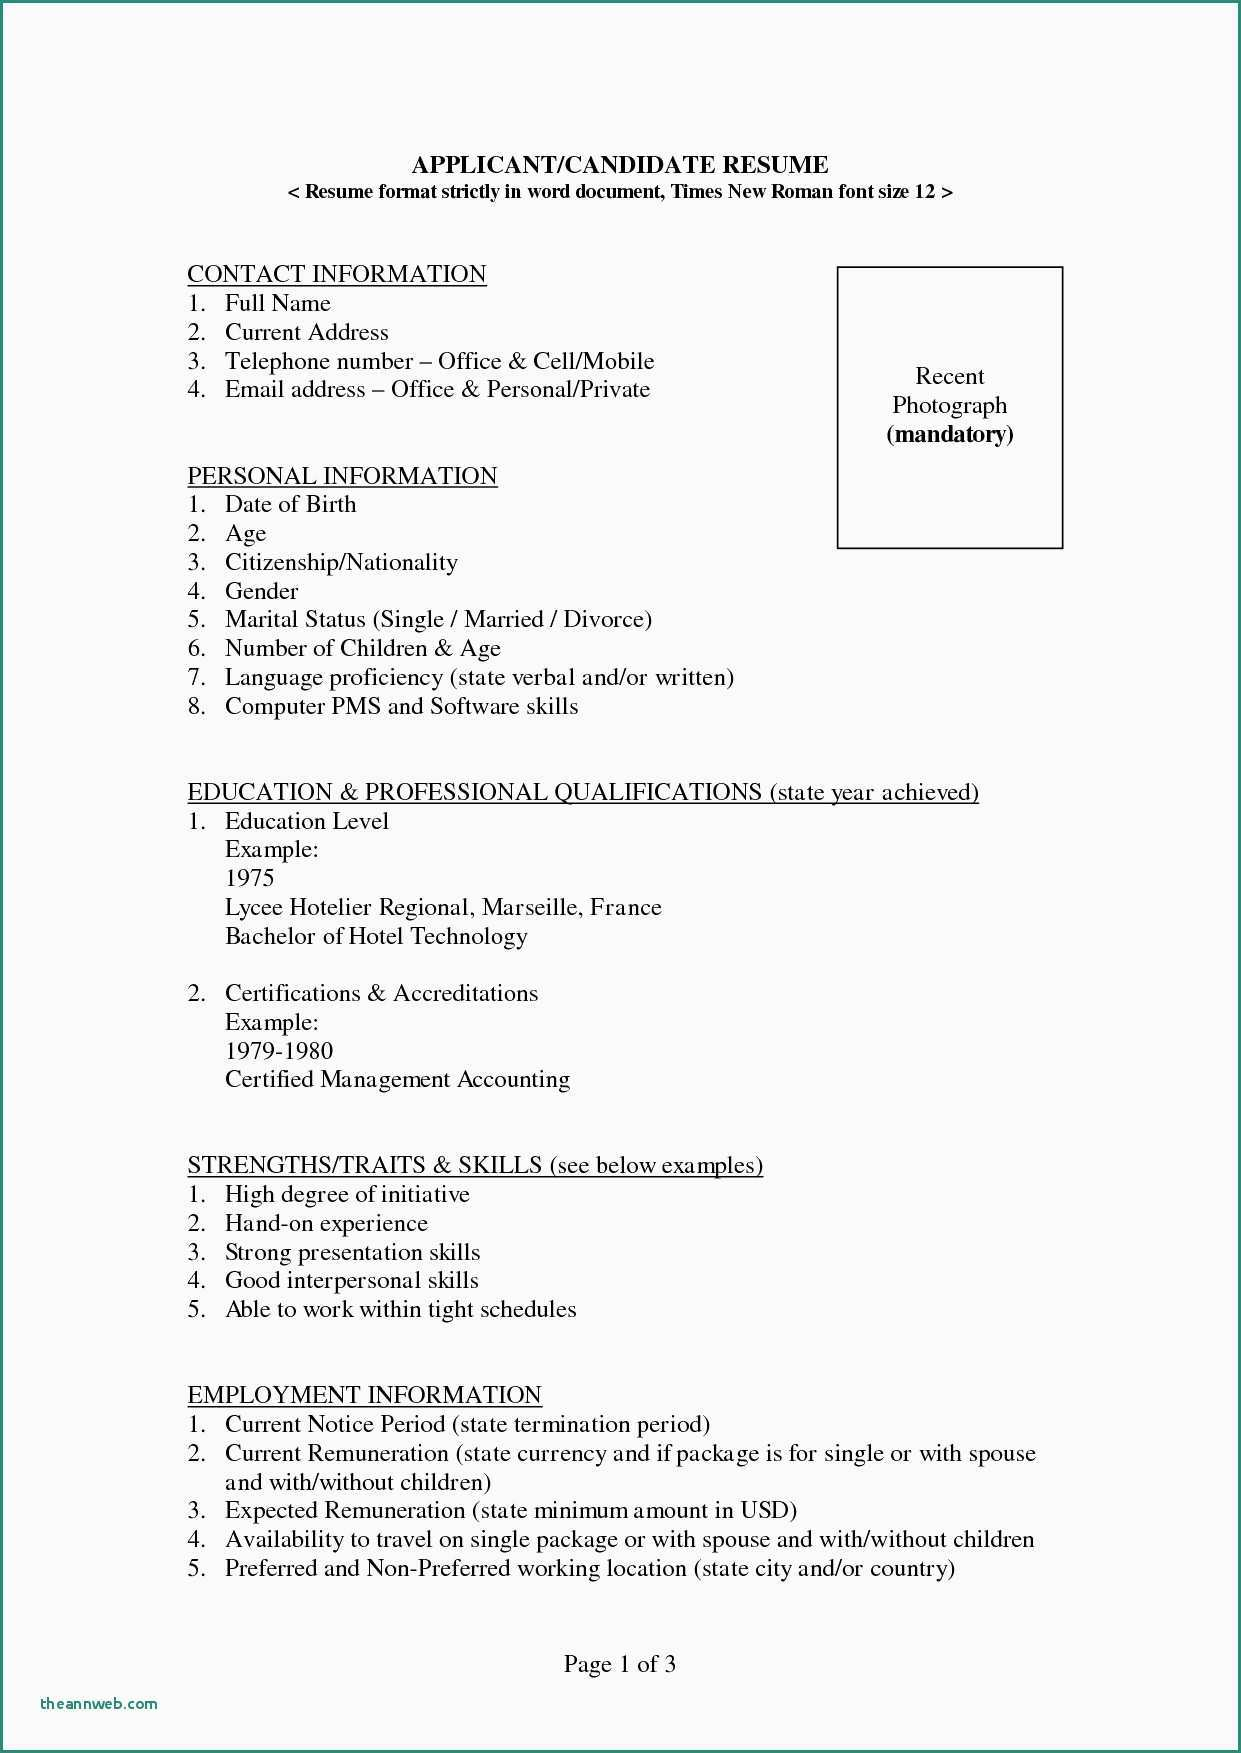 Resume Words To Use Banking Resume Examples Words For Resumes Fresh Good Words To Use